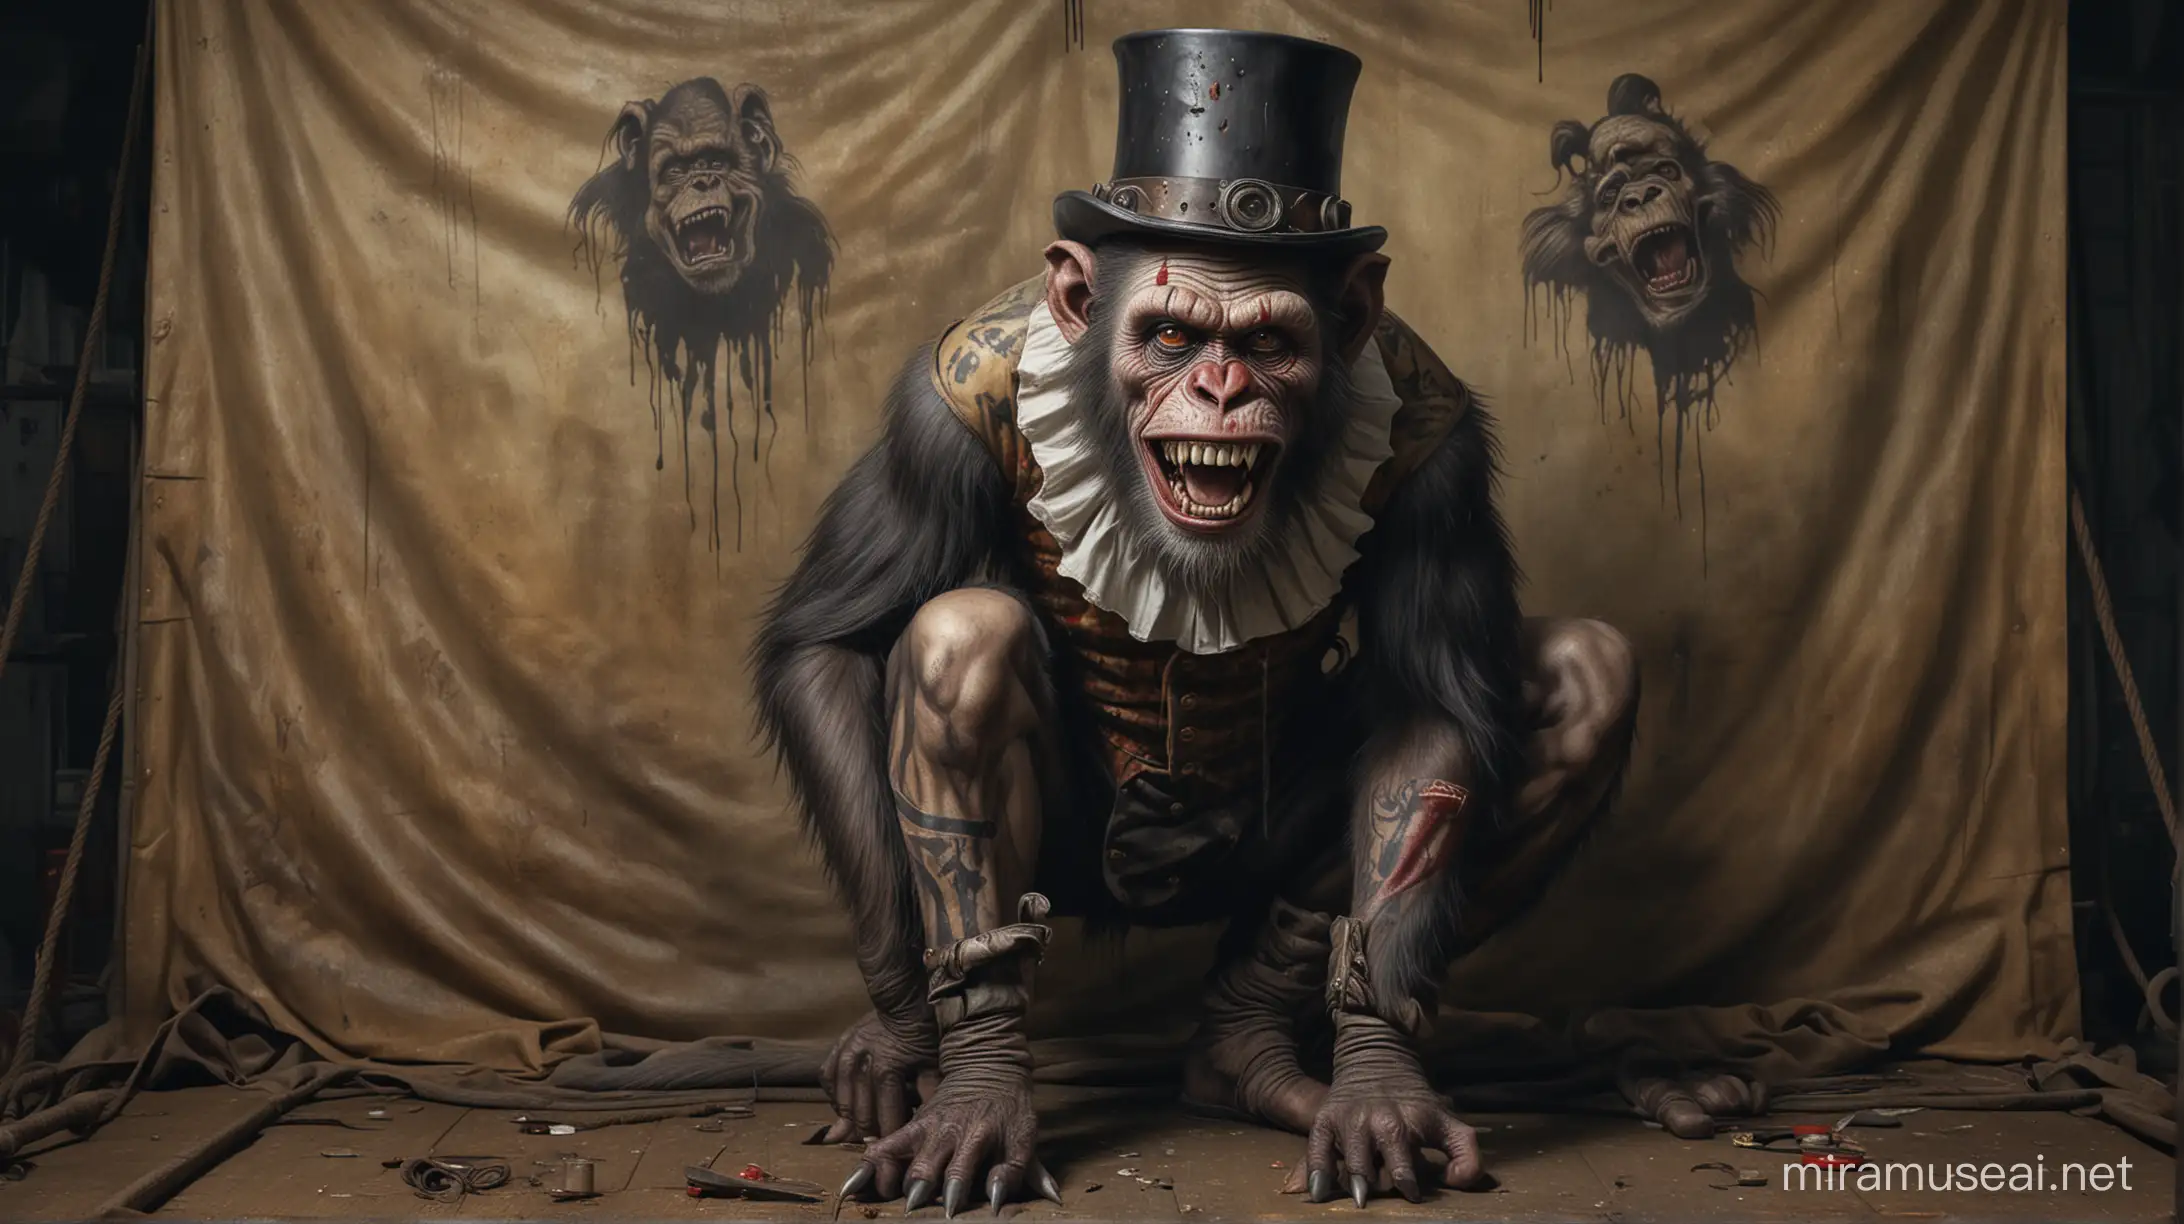 A photo realistic full body painting of a grotesque monkey with sharp teeth and bulging eyes, tattooed all over its body, wearing a tall top hat and clown shoes, dressed in ripped and stained clothing reminiscent of a dirty clown. In a turn of the century circus tent, The monkey is working intently on an old and rustic engine, with greasy hands and a focused expression. The scene is gritty and unsettling, with shadows casting an eerie ambiance at night